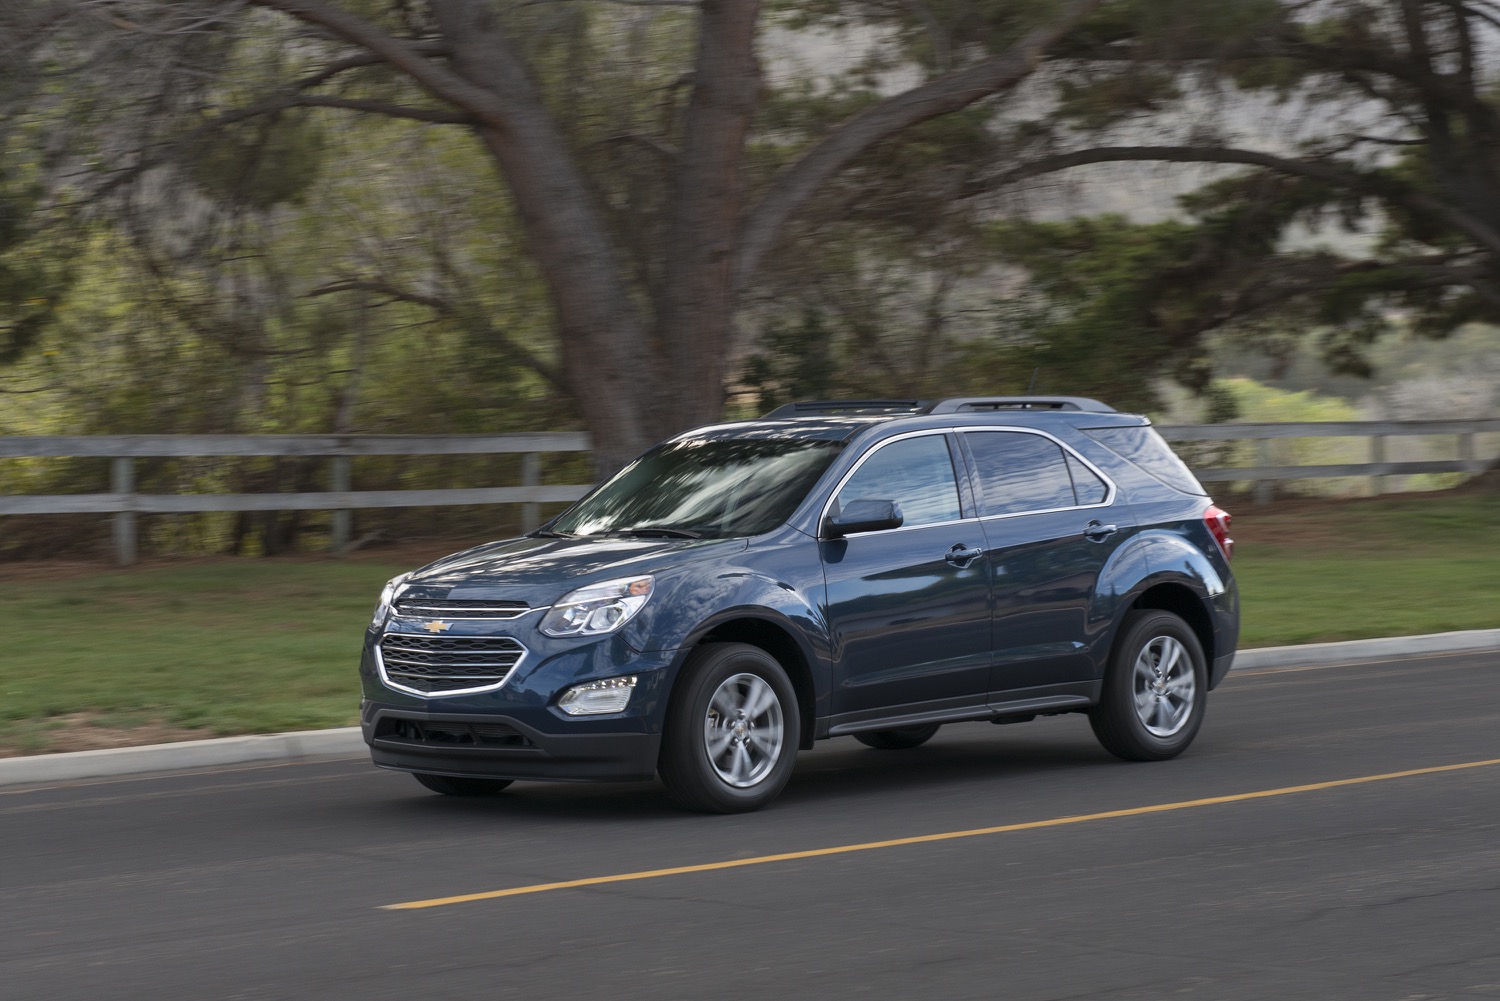 2017 Chevy Equinox Info, Pictures, Specs, Wiki | GM Authority